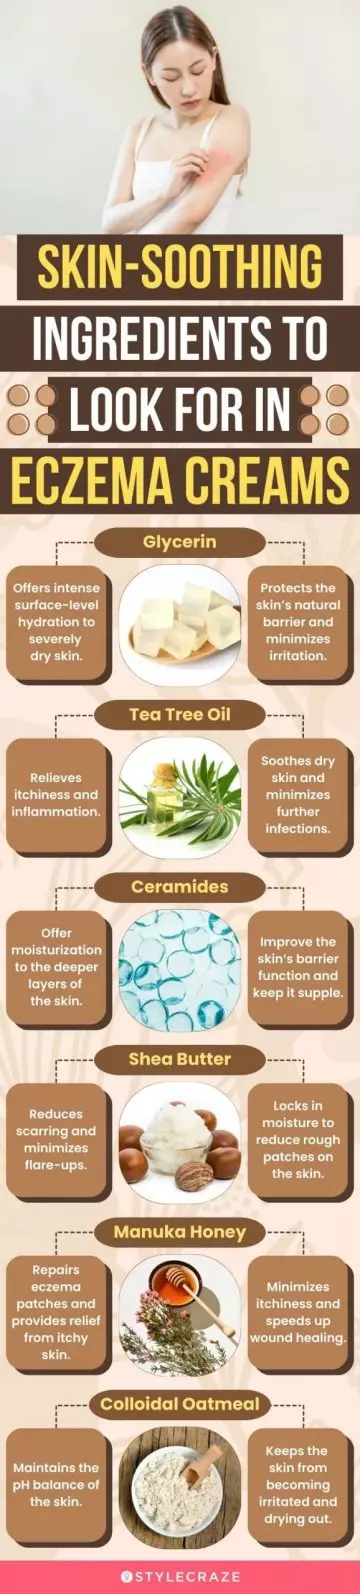 Skin-Soothing Ingredients To Look For In Eczema Creams (infographic)